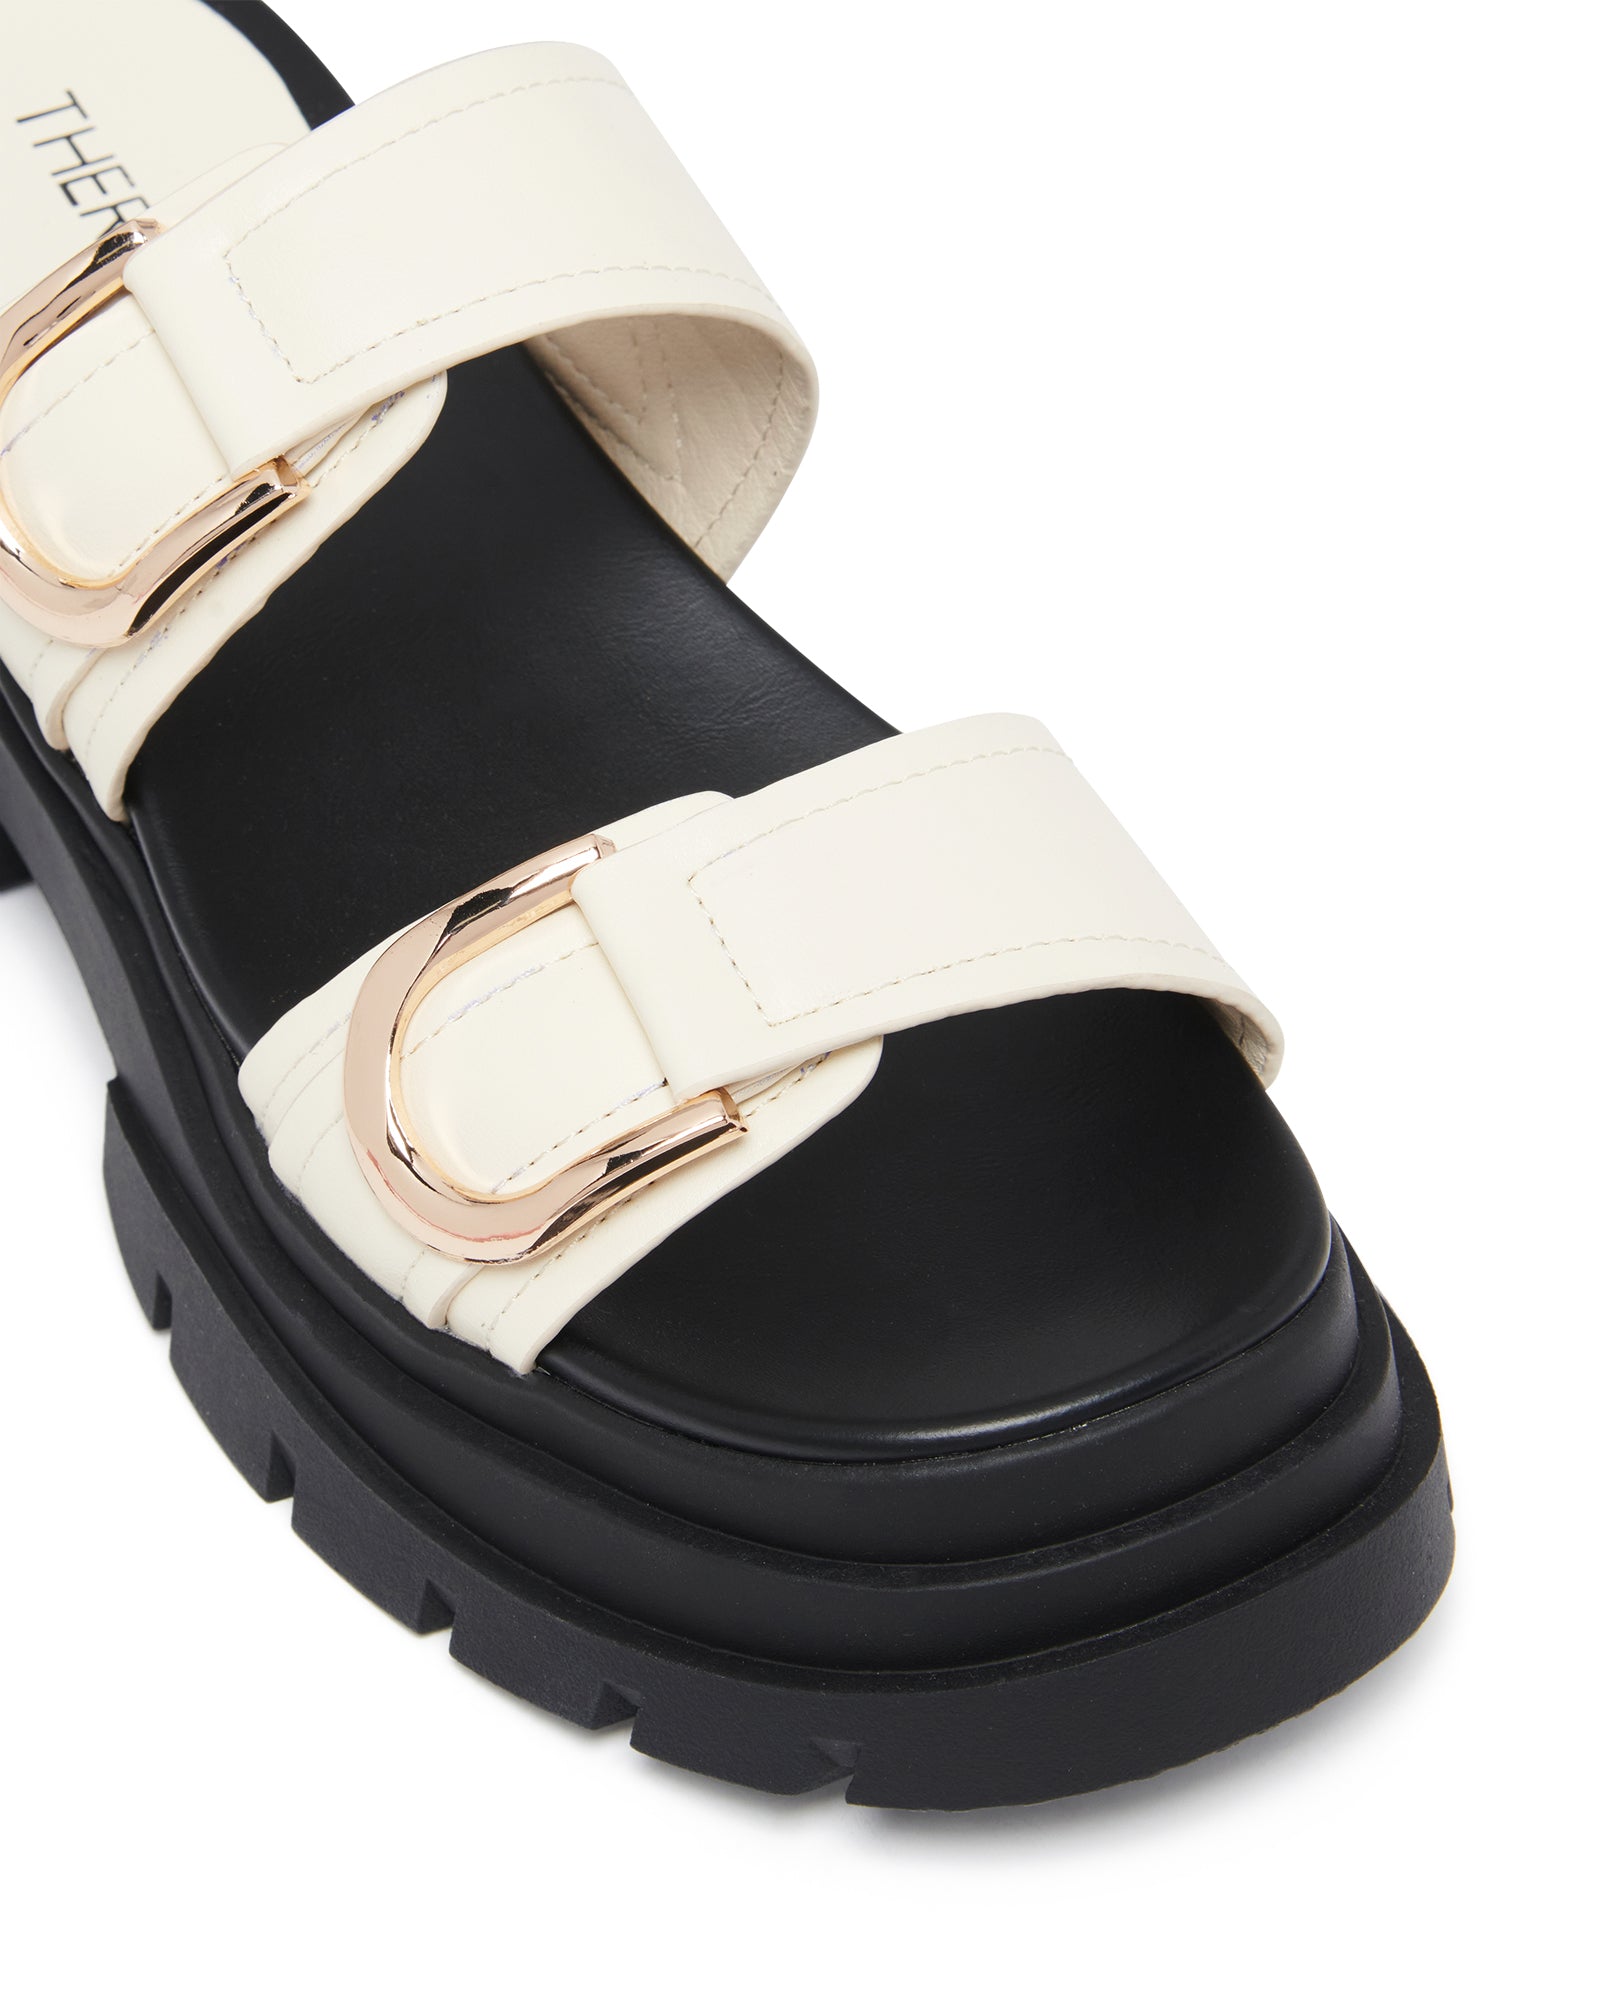 Therapy Shoes Myer Bone | Women's Sandals | Slides | Chunky | Flatform